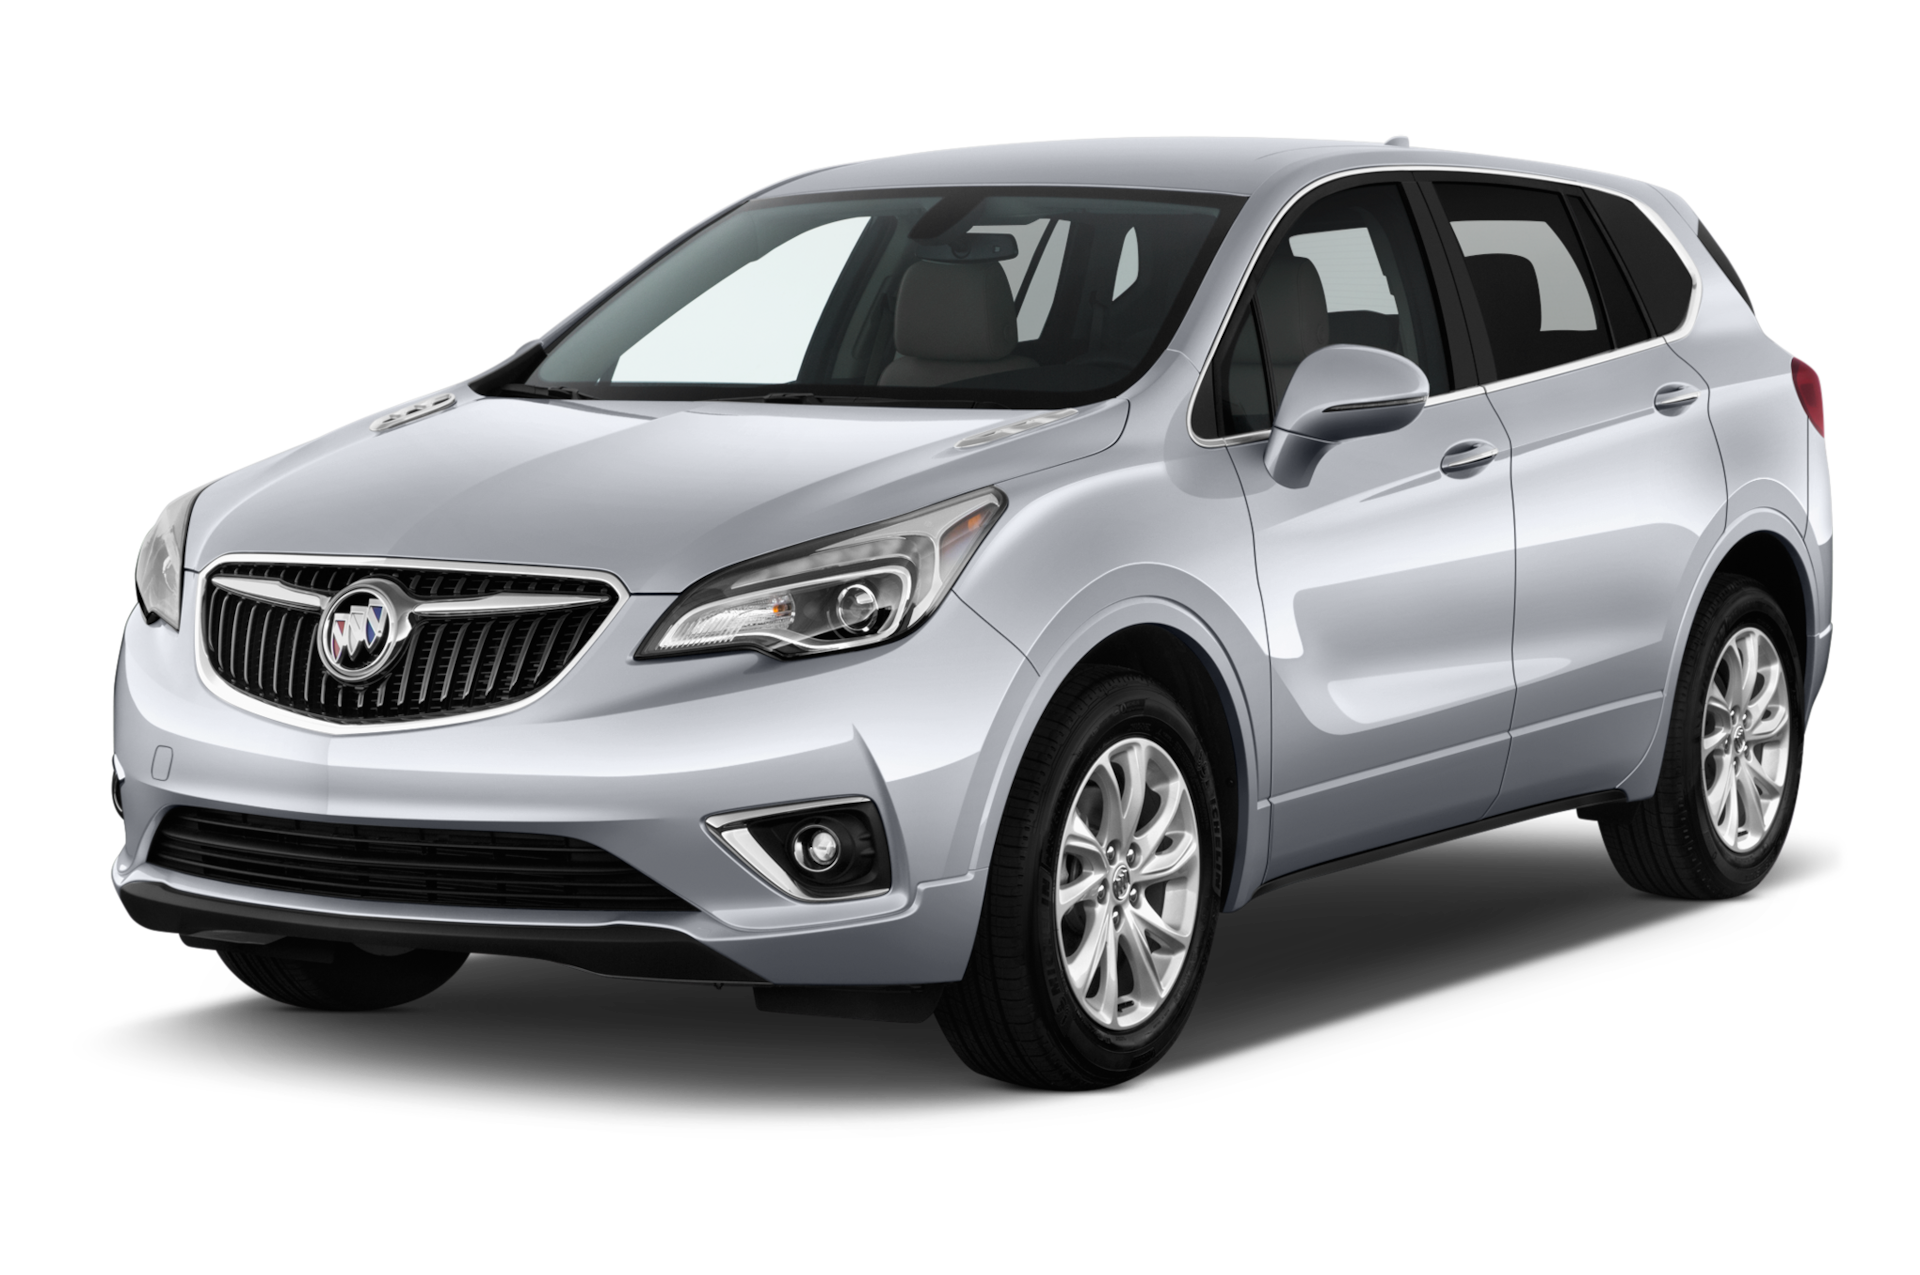 2019 Buick Envision Prices, Reviews, and Photos - MotorTrend